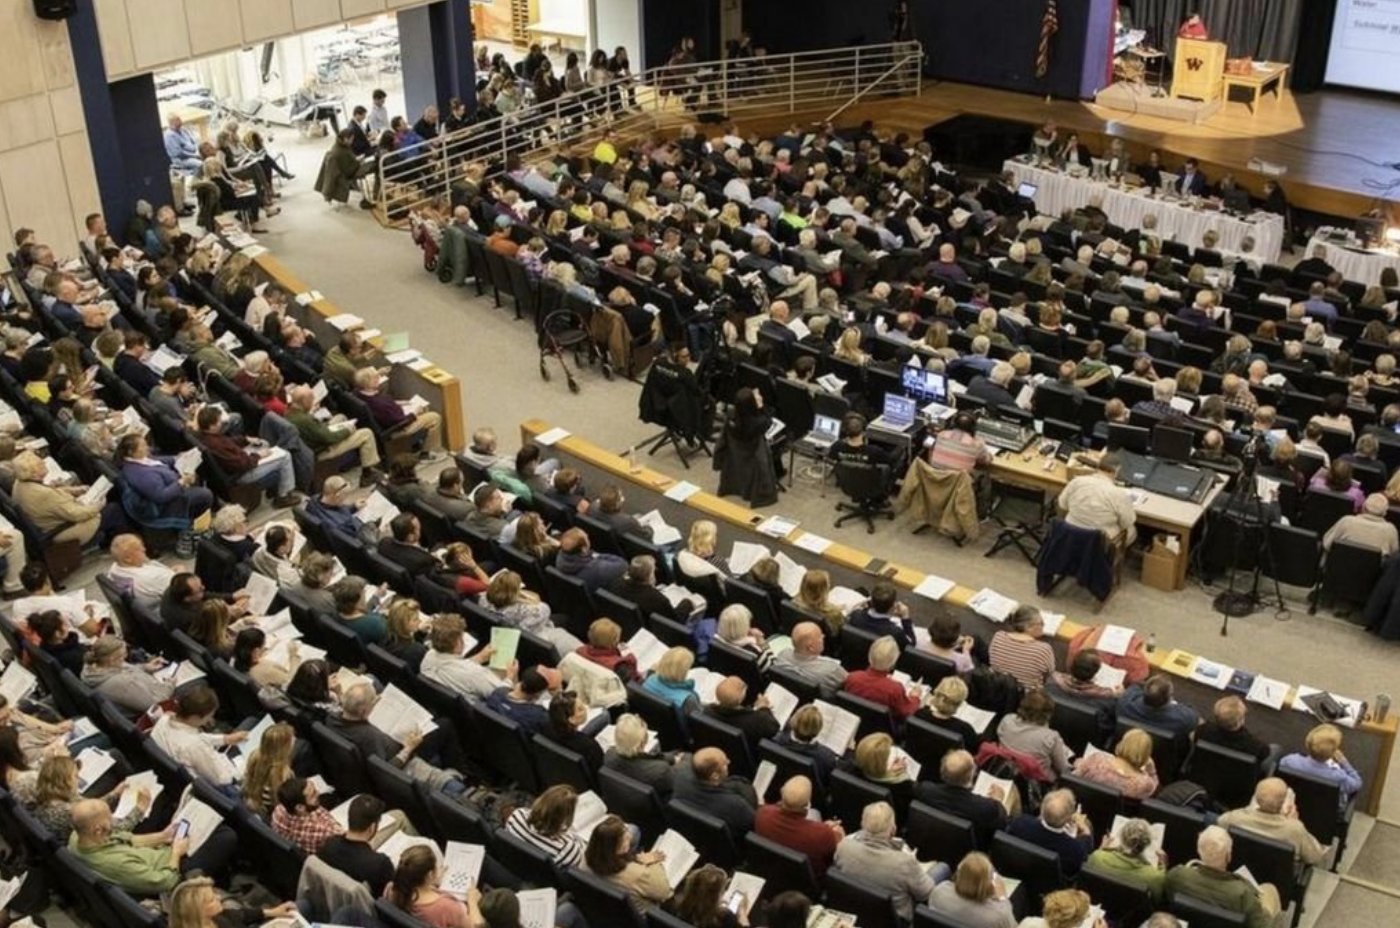 More than 770 voters attended the first night of the 2019 Annual Town Meeting.